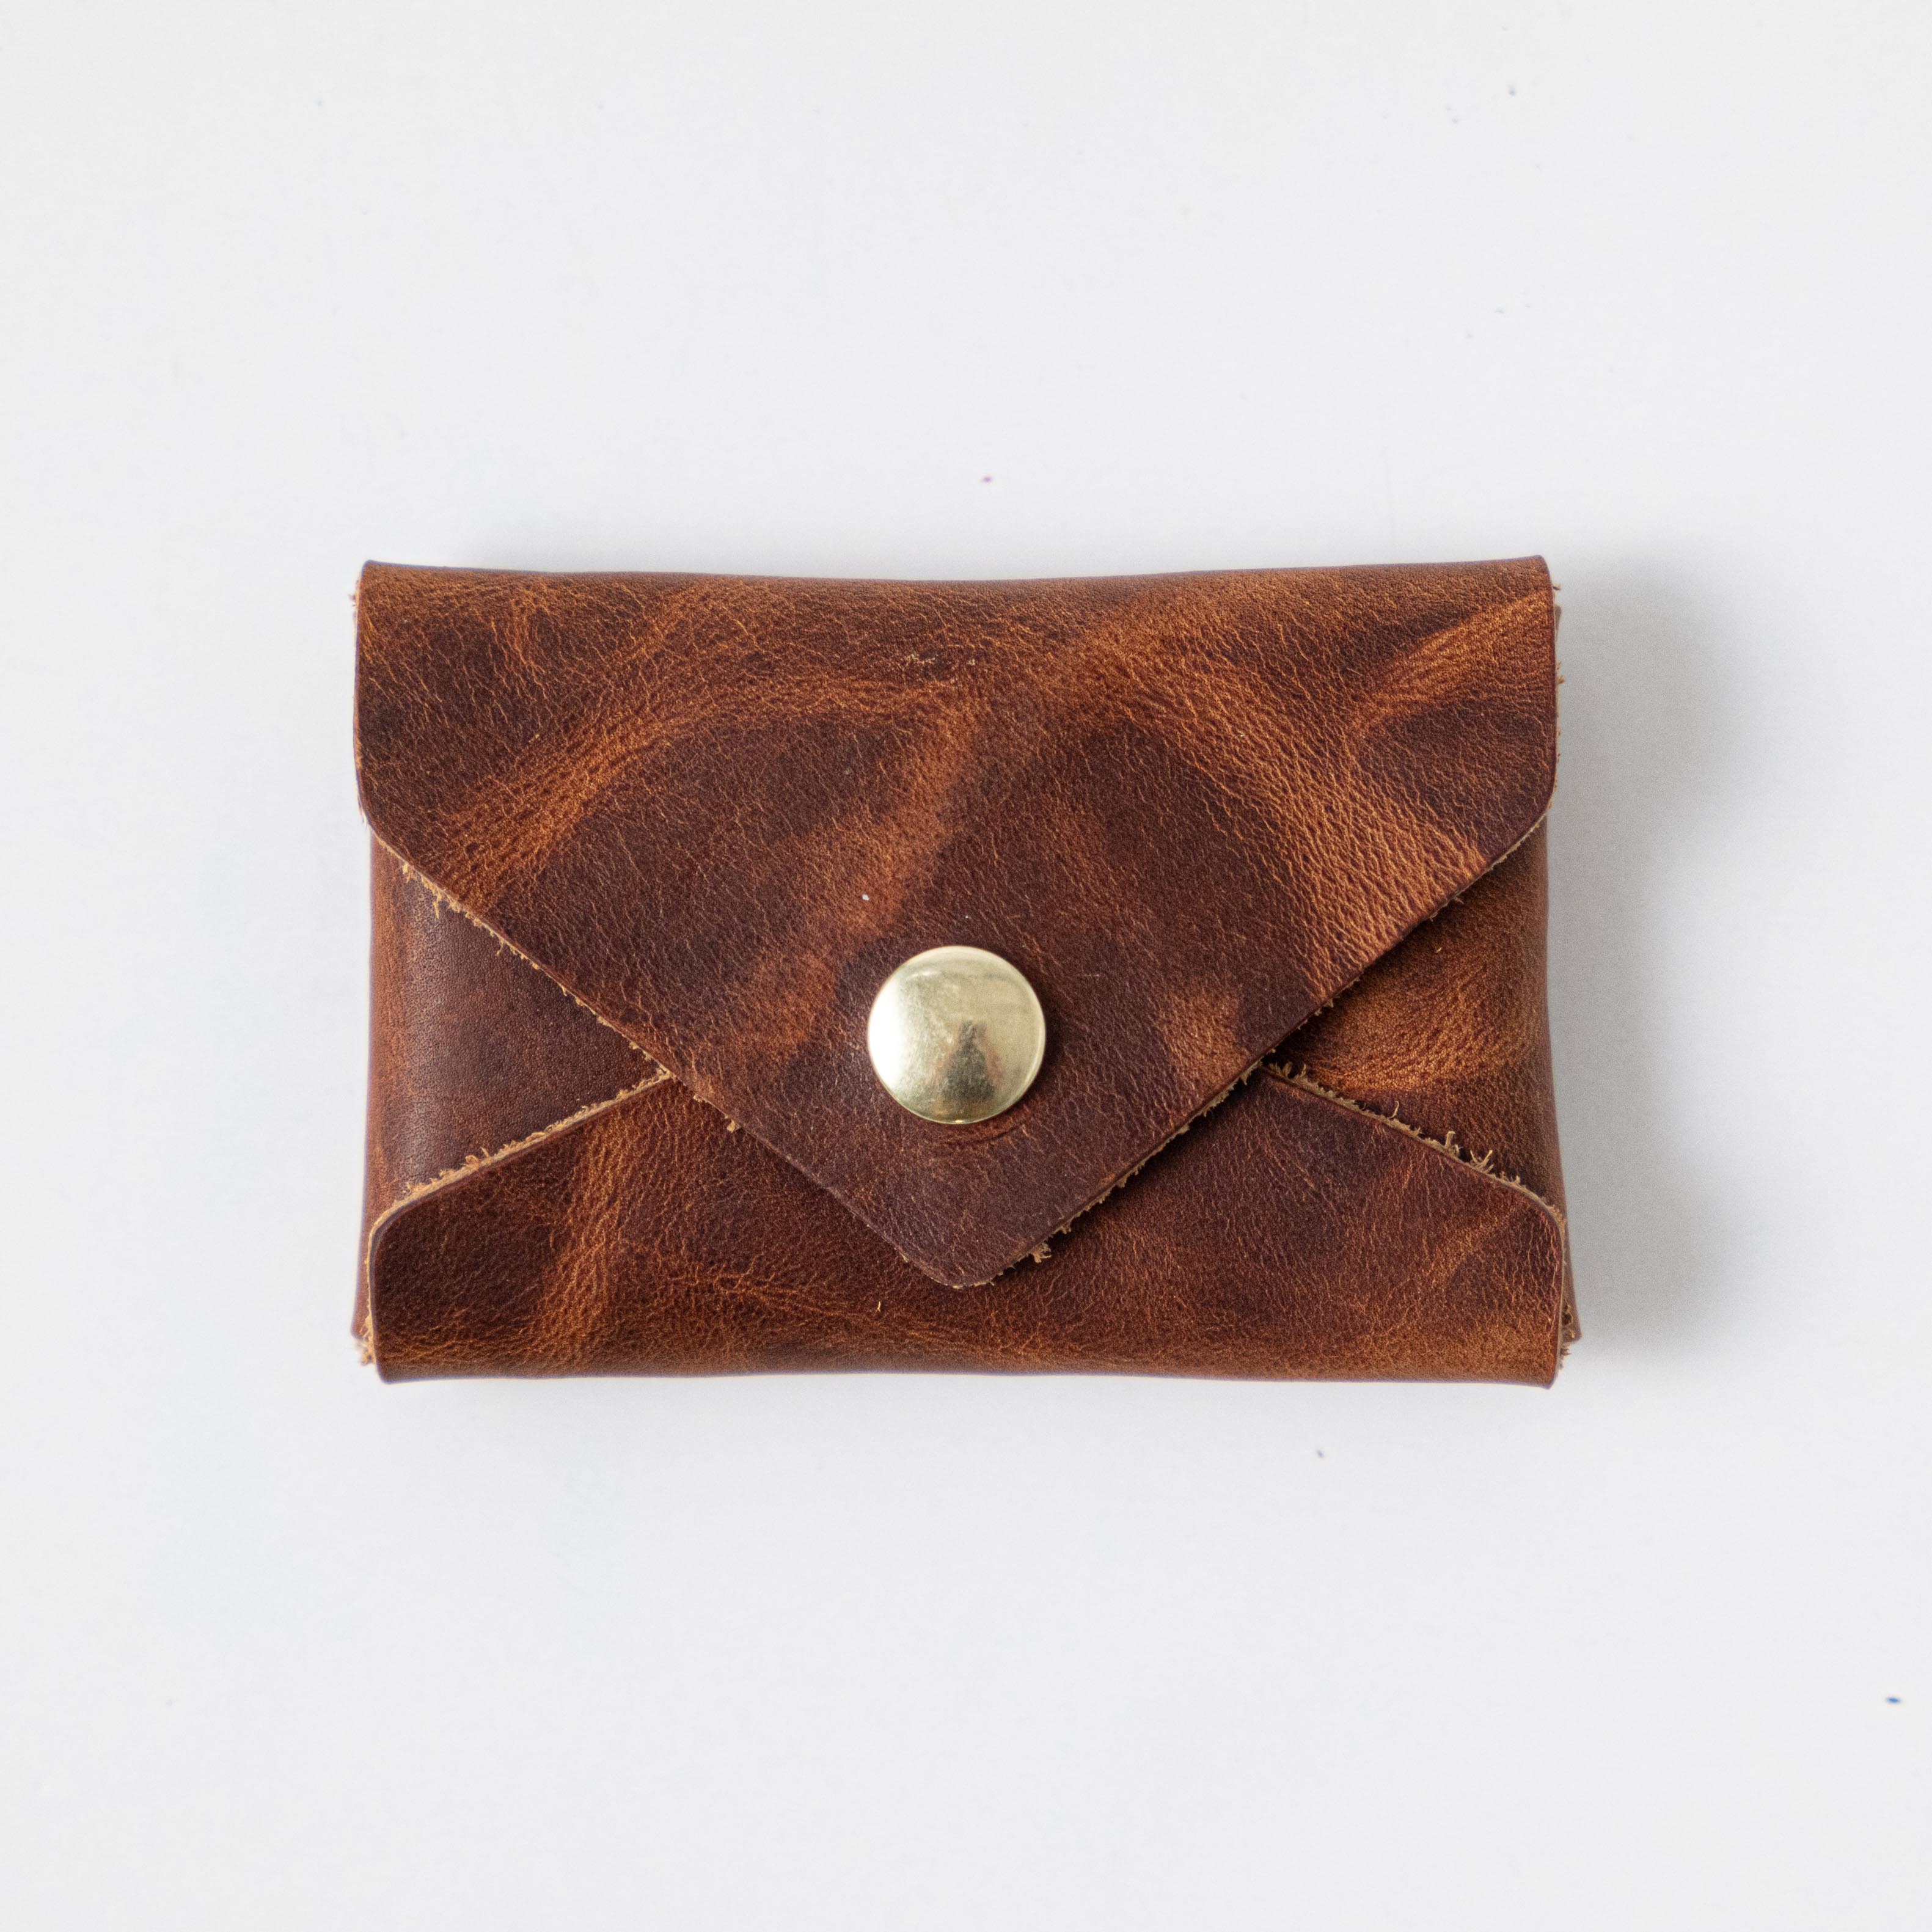 Minimalist Trifold Wallet With Coin Pocket Leather – Miajee's